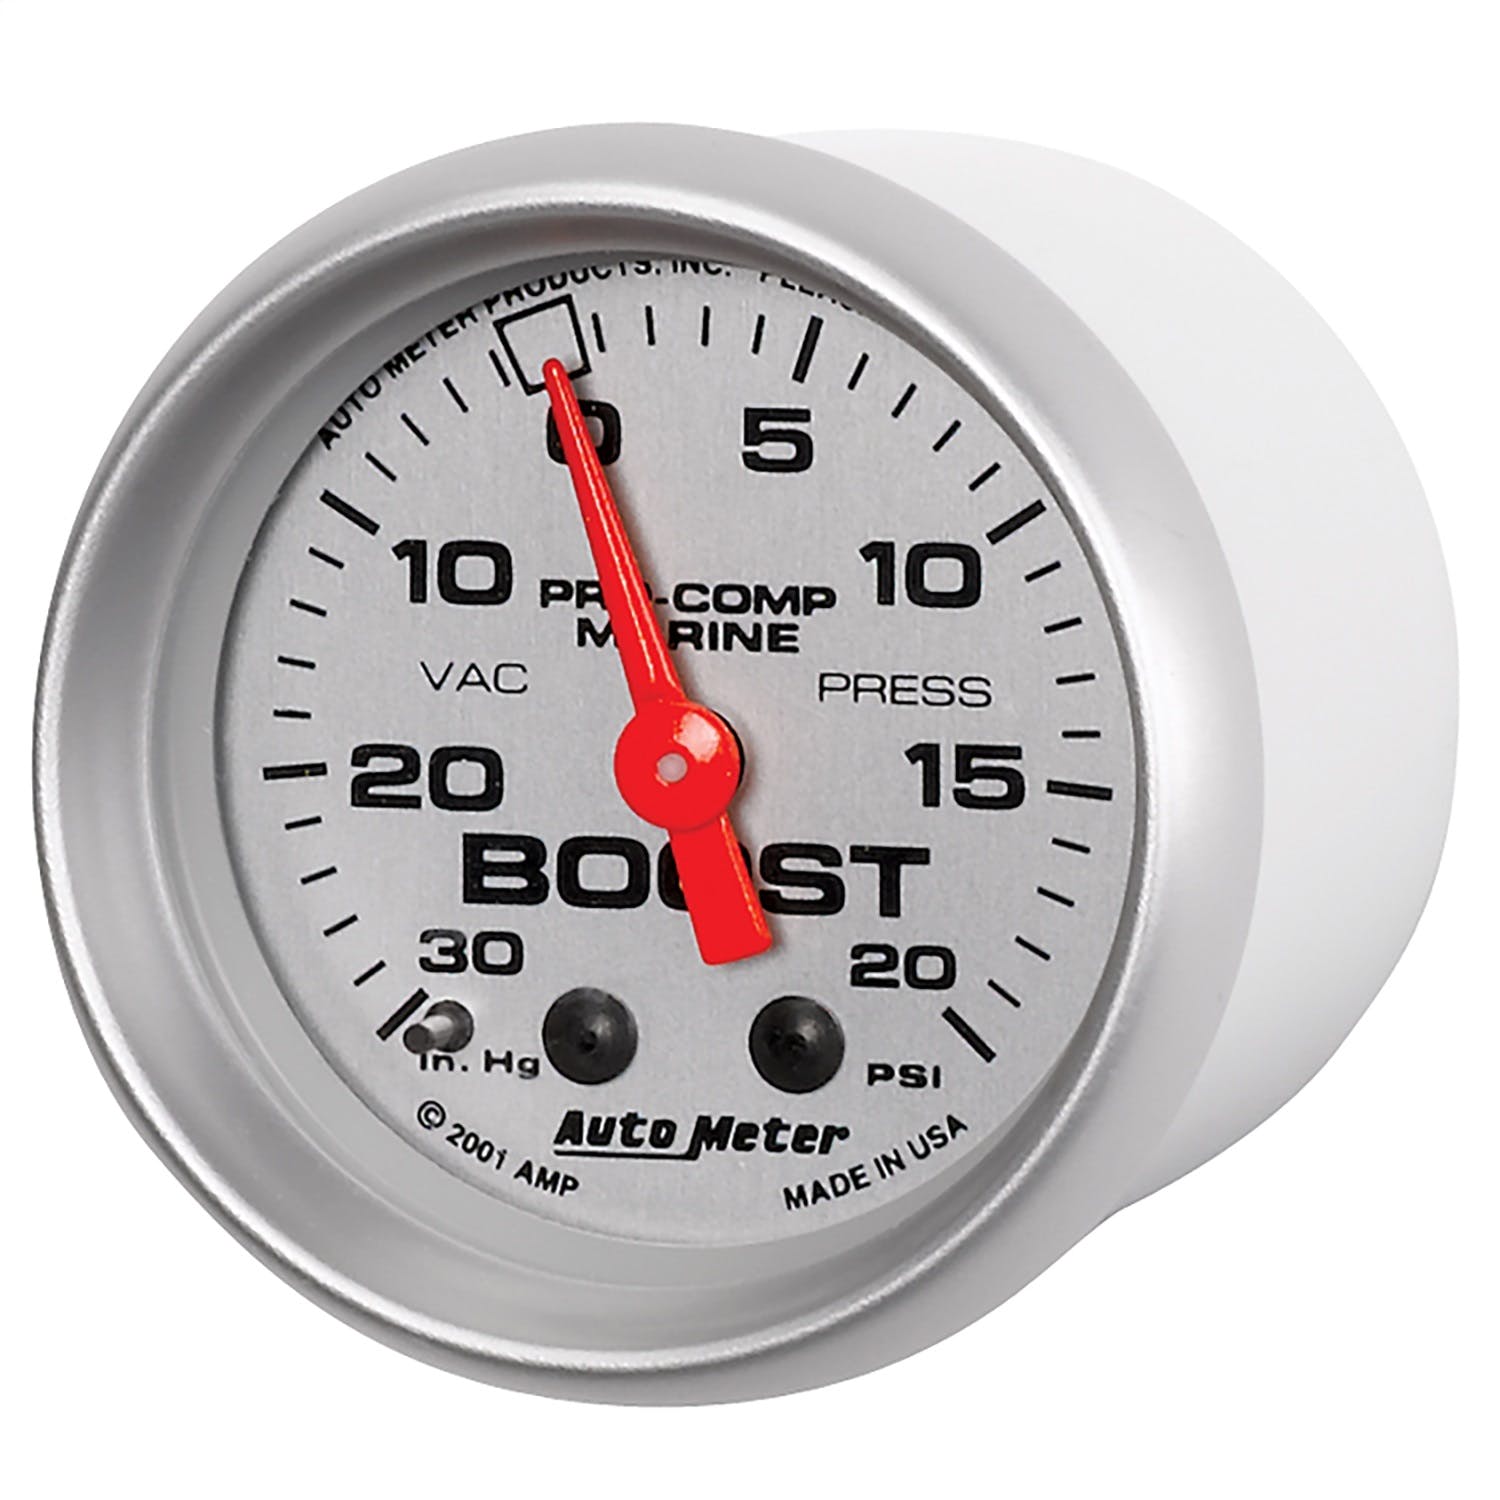 AutoMeter Products 200774-33 Vacuum/Boost Gauge, Mechanical-Marine Silver 2 1/16, 30INHG-20PSI